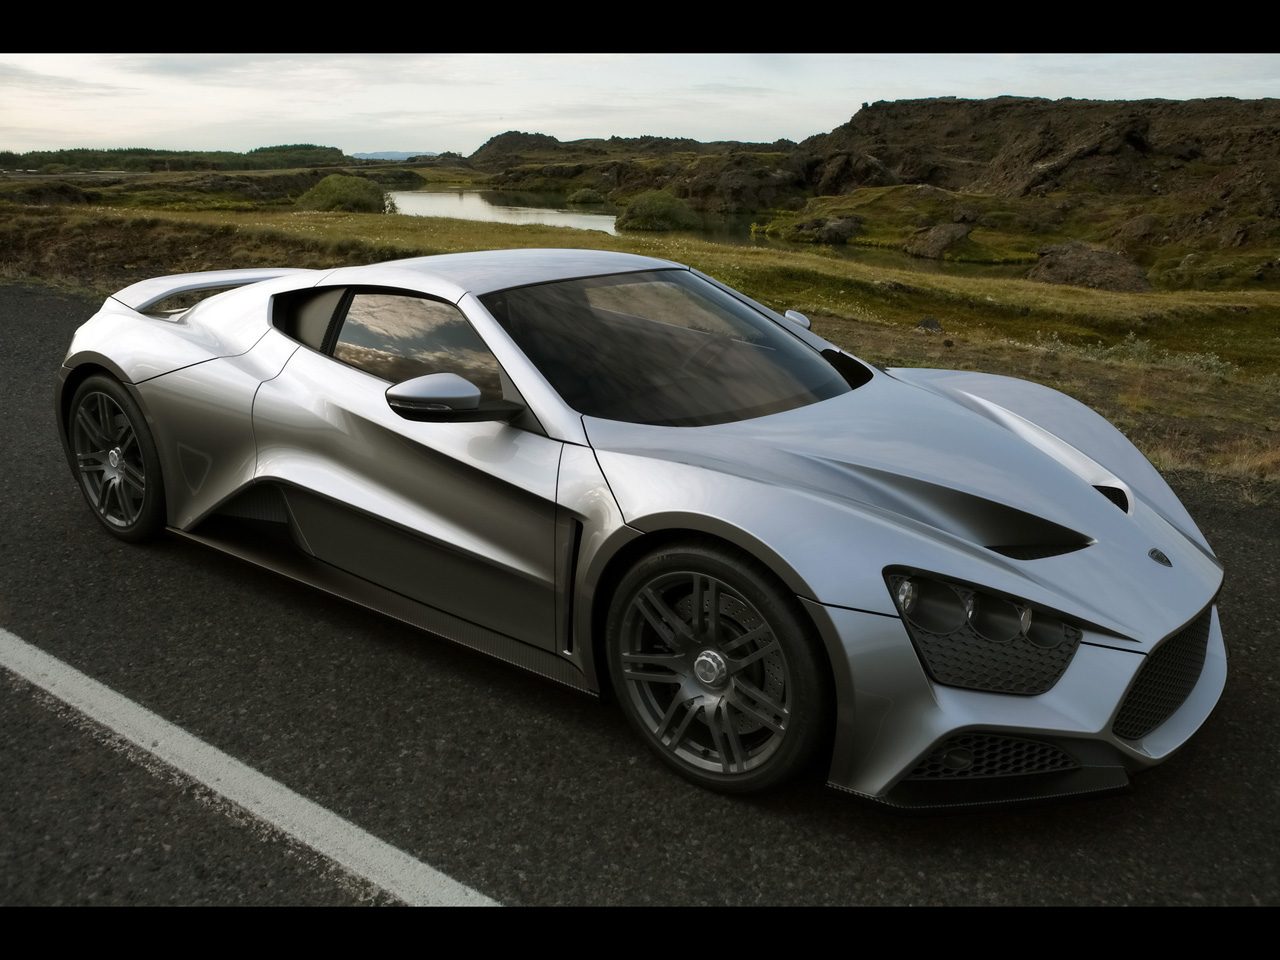 2009-Zenvo-ST1-Front-And-Side-1280x960.jpg